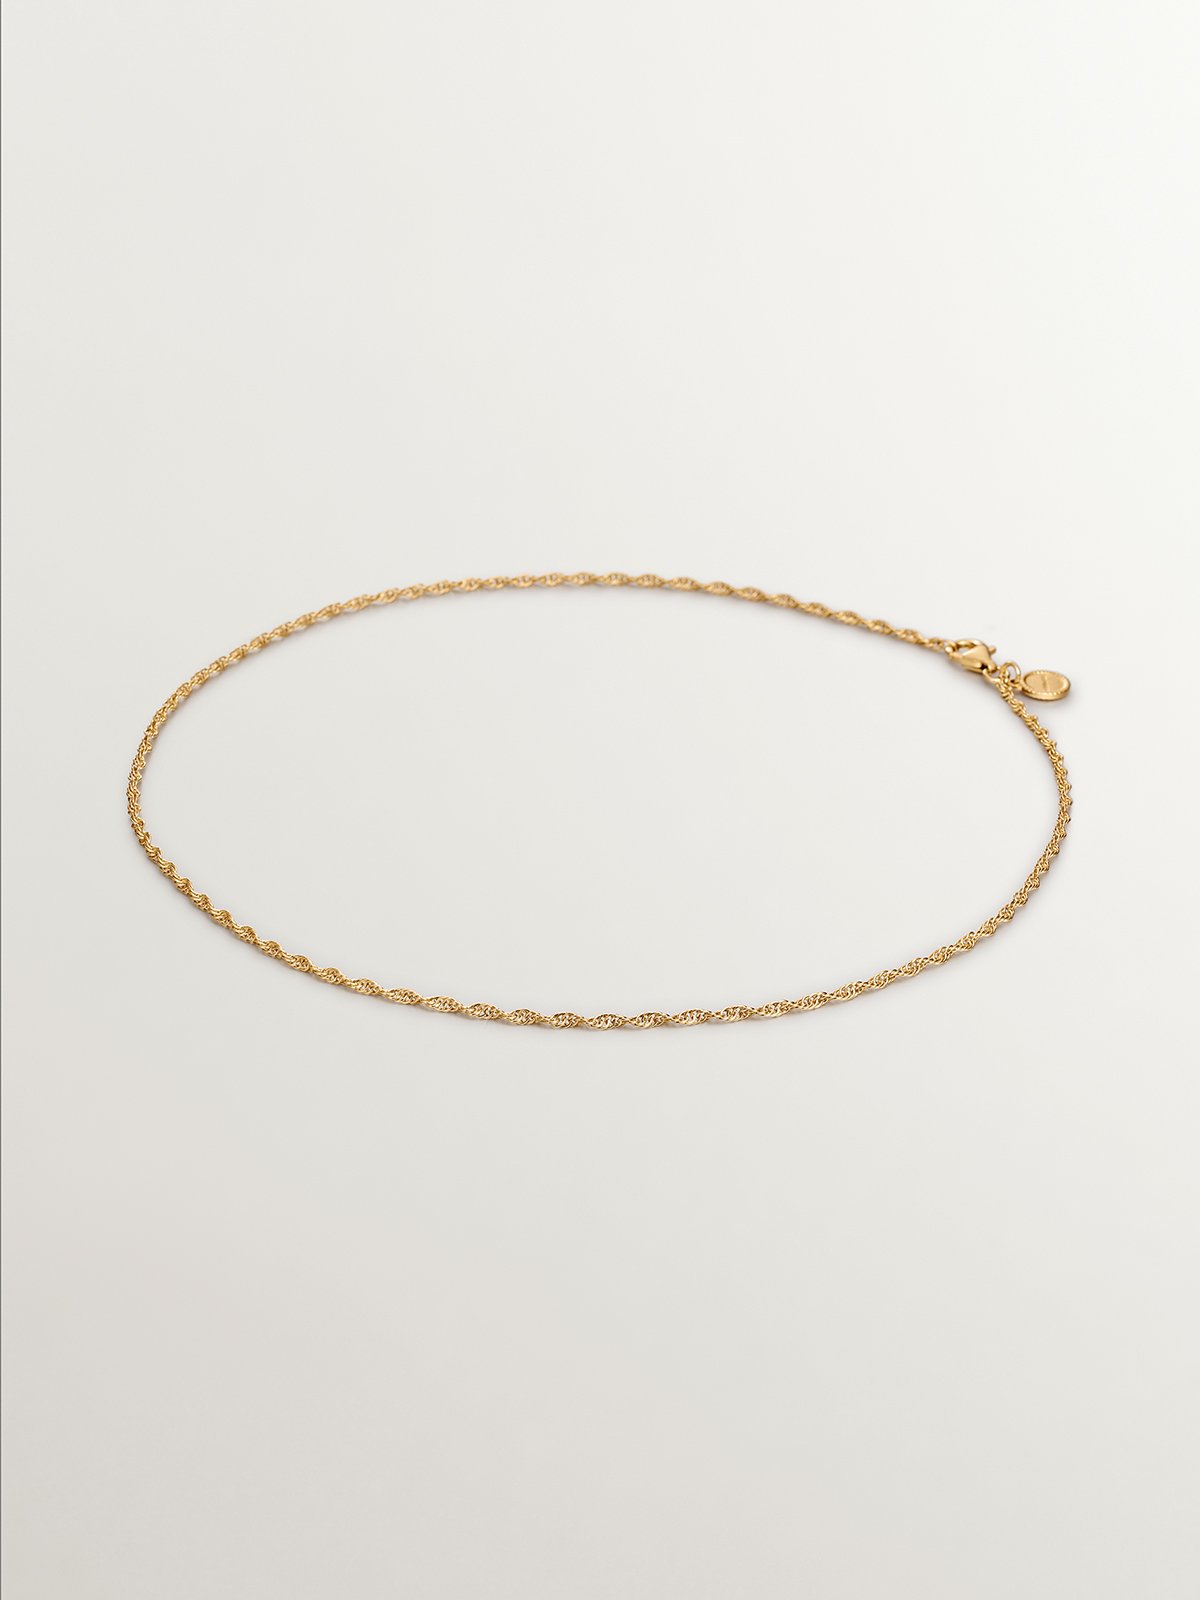 925 Silver Rope Link Chain coated in 18k Yellow Gold